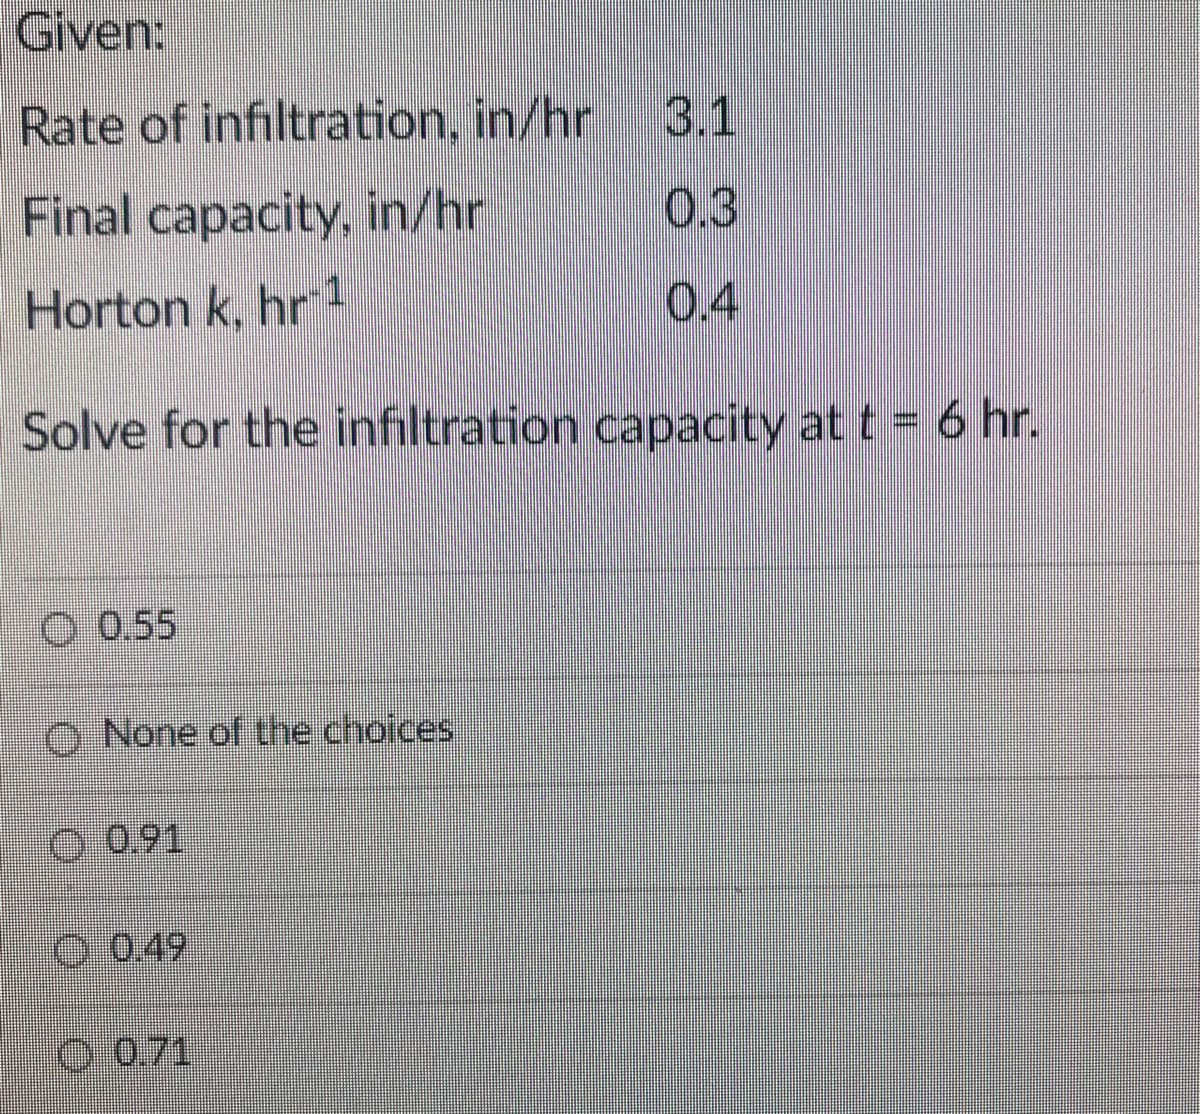 Given:
Rate of infiltration, in/hr
3.1
Final capacity, in/hr
0.3
Horton k, hr
0.4
Solve for the infiltration capacity at t = 6 hr.
O 0.55
O None of the choices
O0,91
O 0.49
0 0.71
